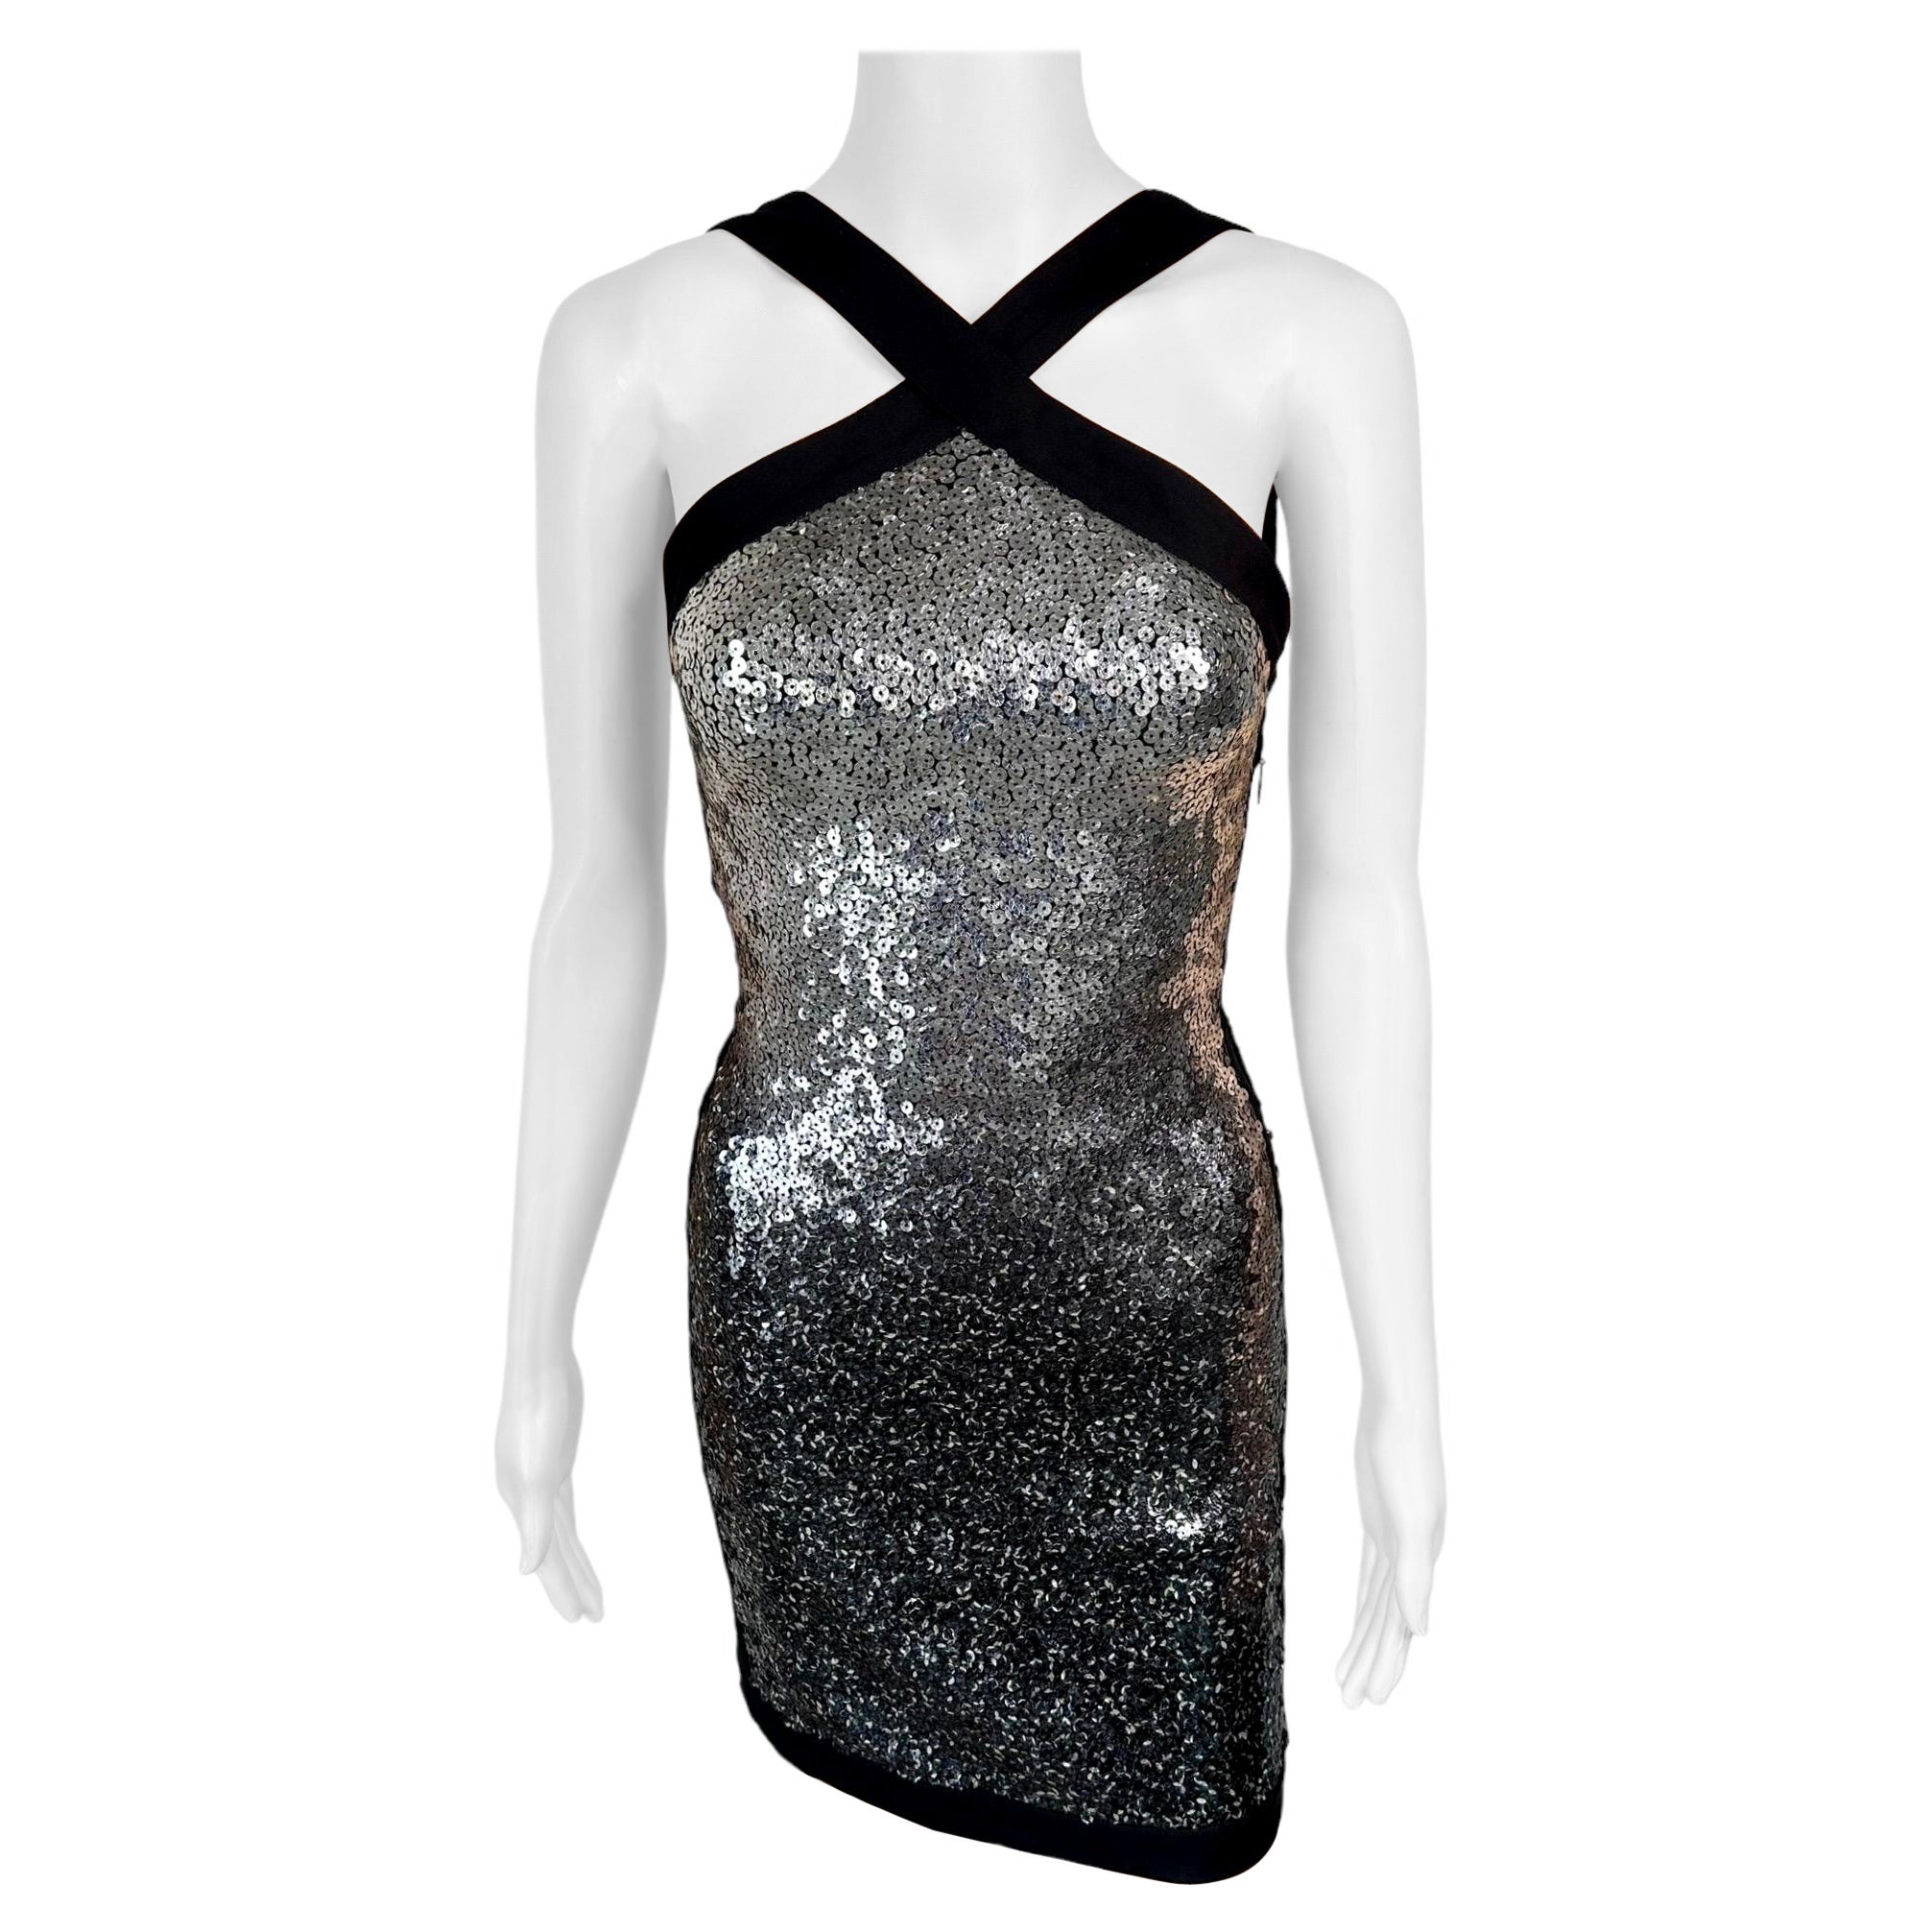 Roberto Cavalli S/S 2008 Runway Sequin Embellished Ombre Backless Mini Dress For Sale